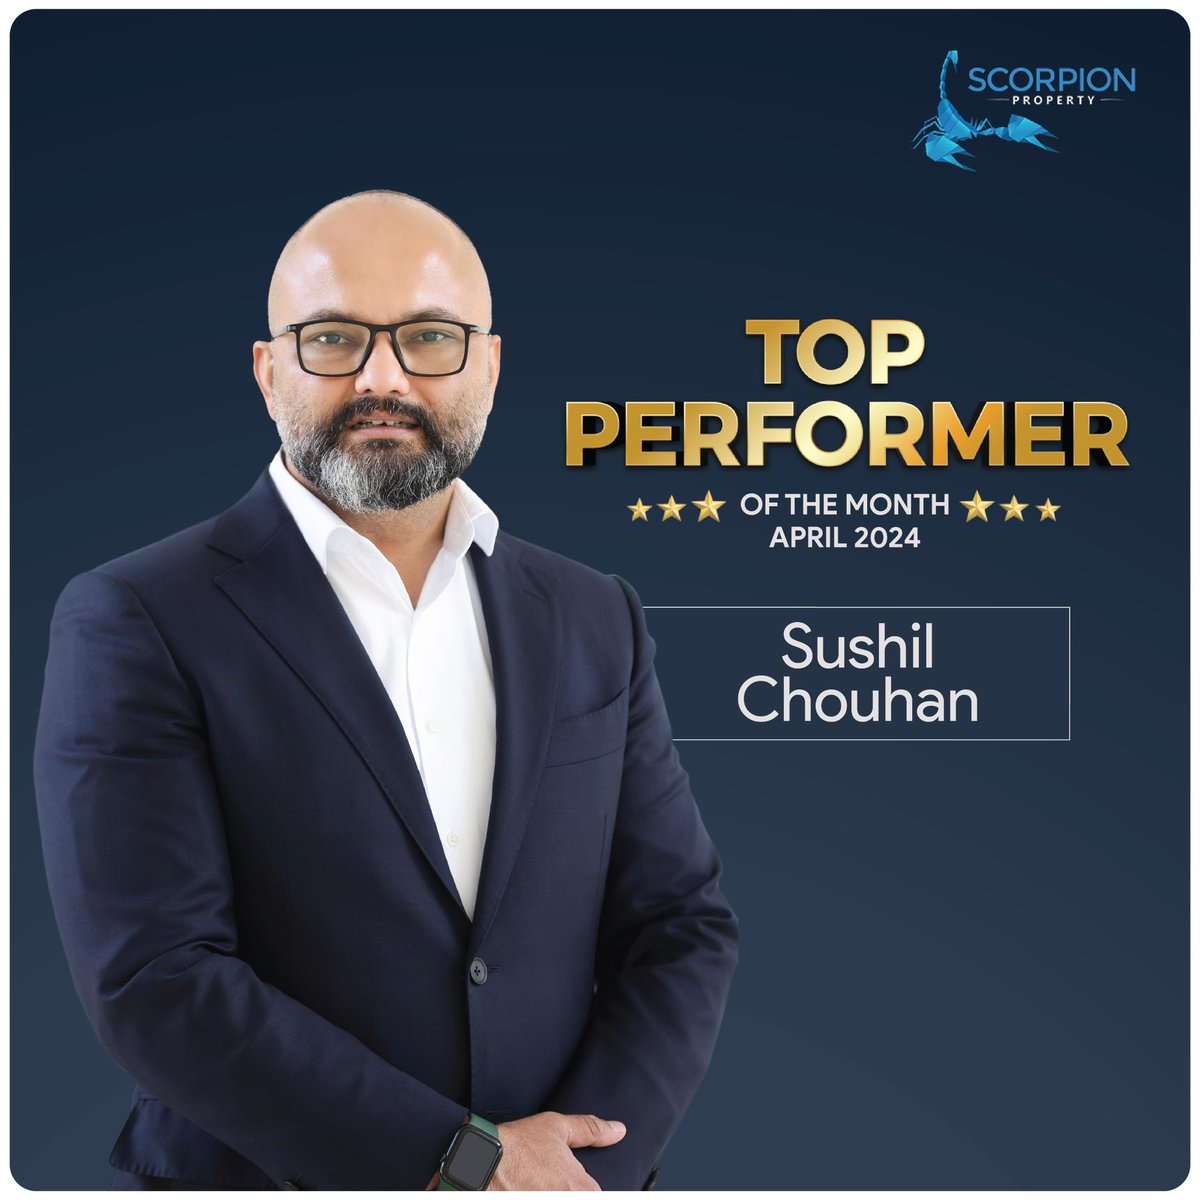 Congratulations Mr. Sushil Chouhan for being one of the top performers for the month of April 2024! Your unwavering dedication and commitment to excellence have set a new standard for success. Keep it up!

#scorpionproperty #achievers #topperformers #topperformersofthemonth